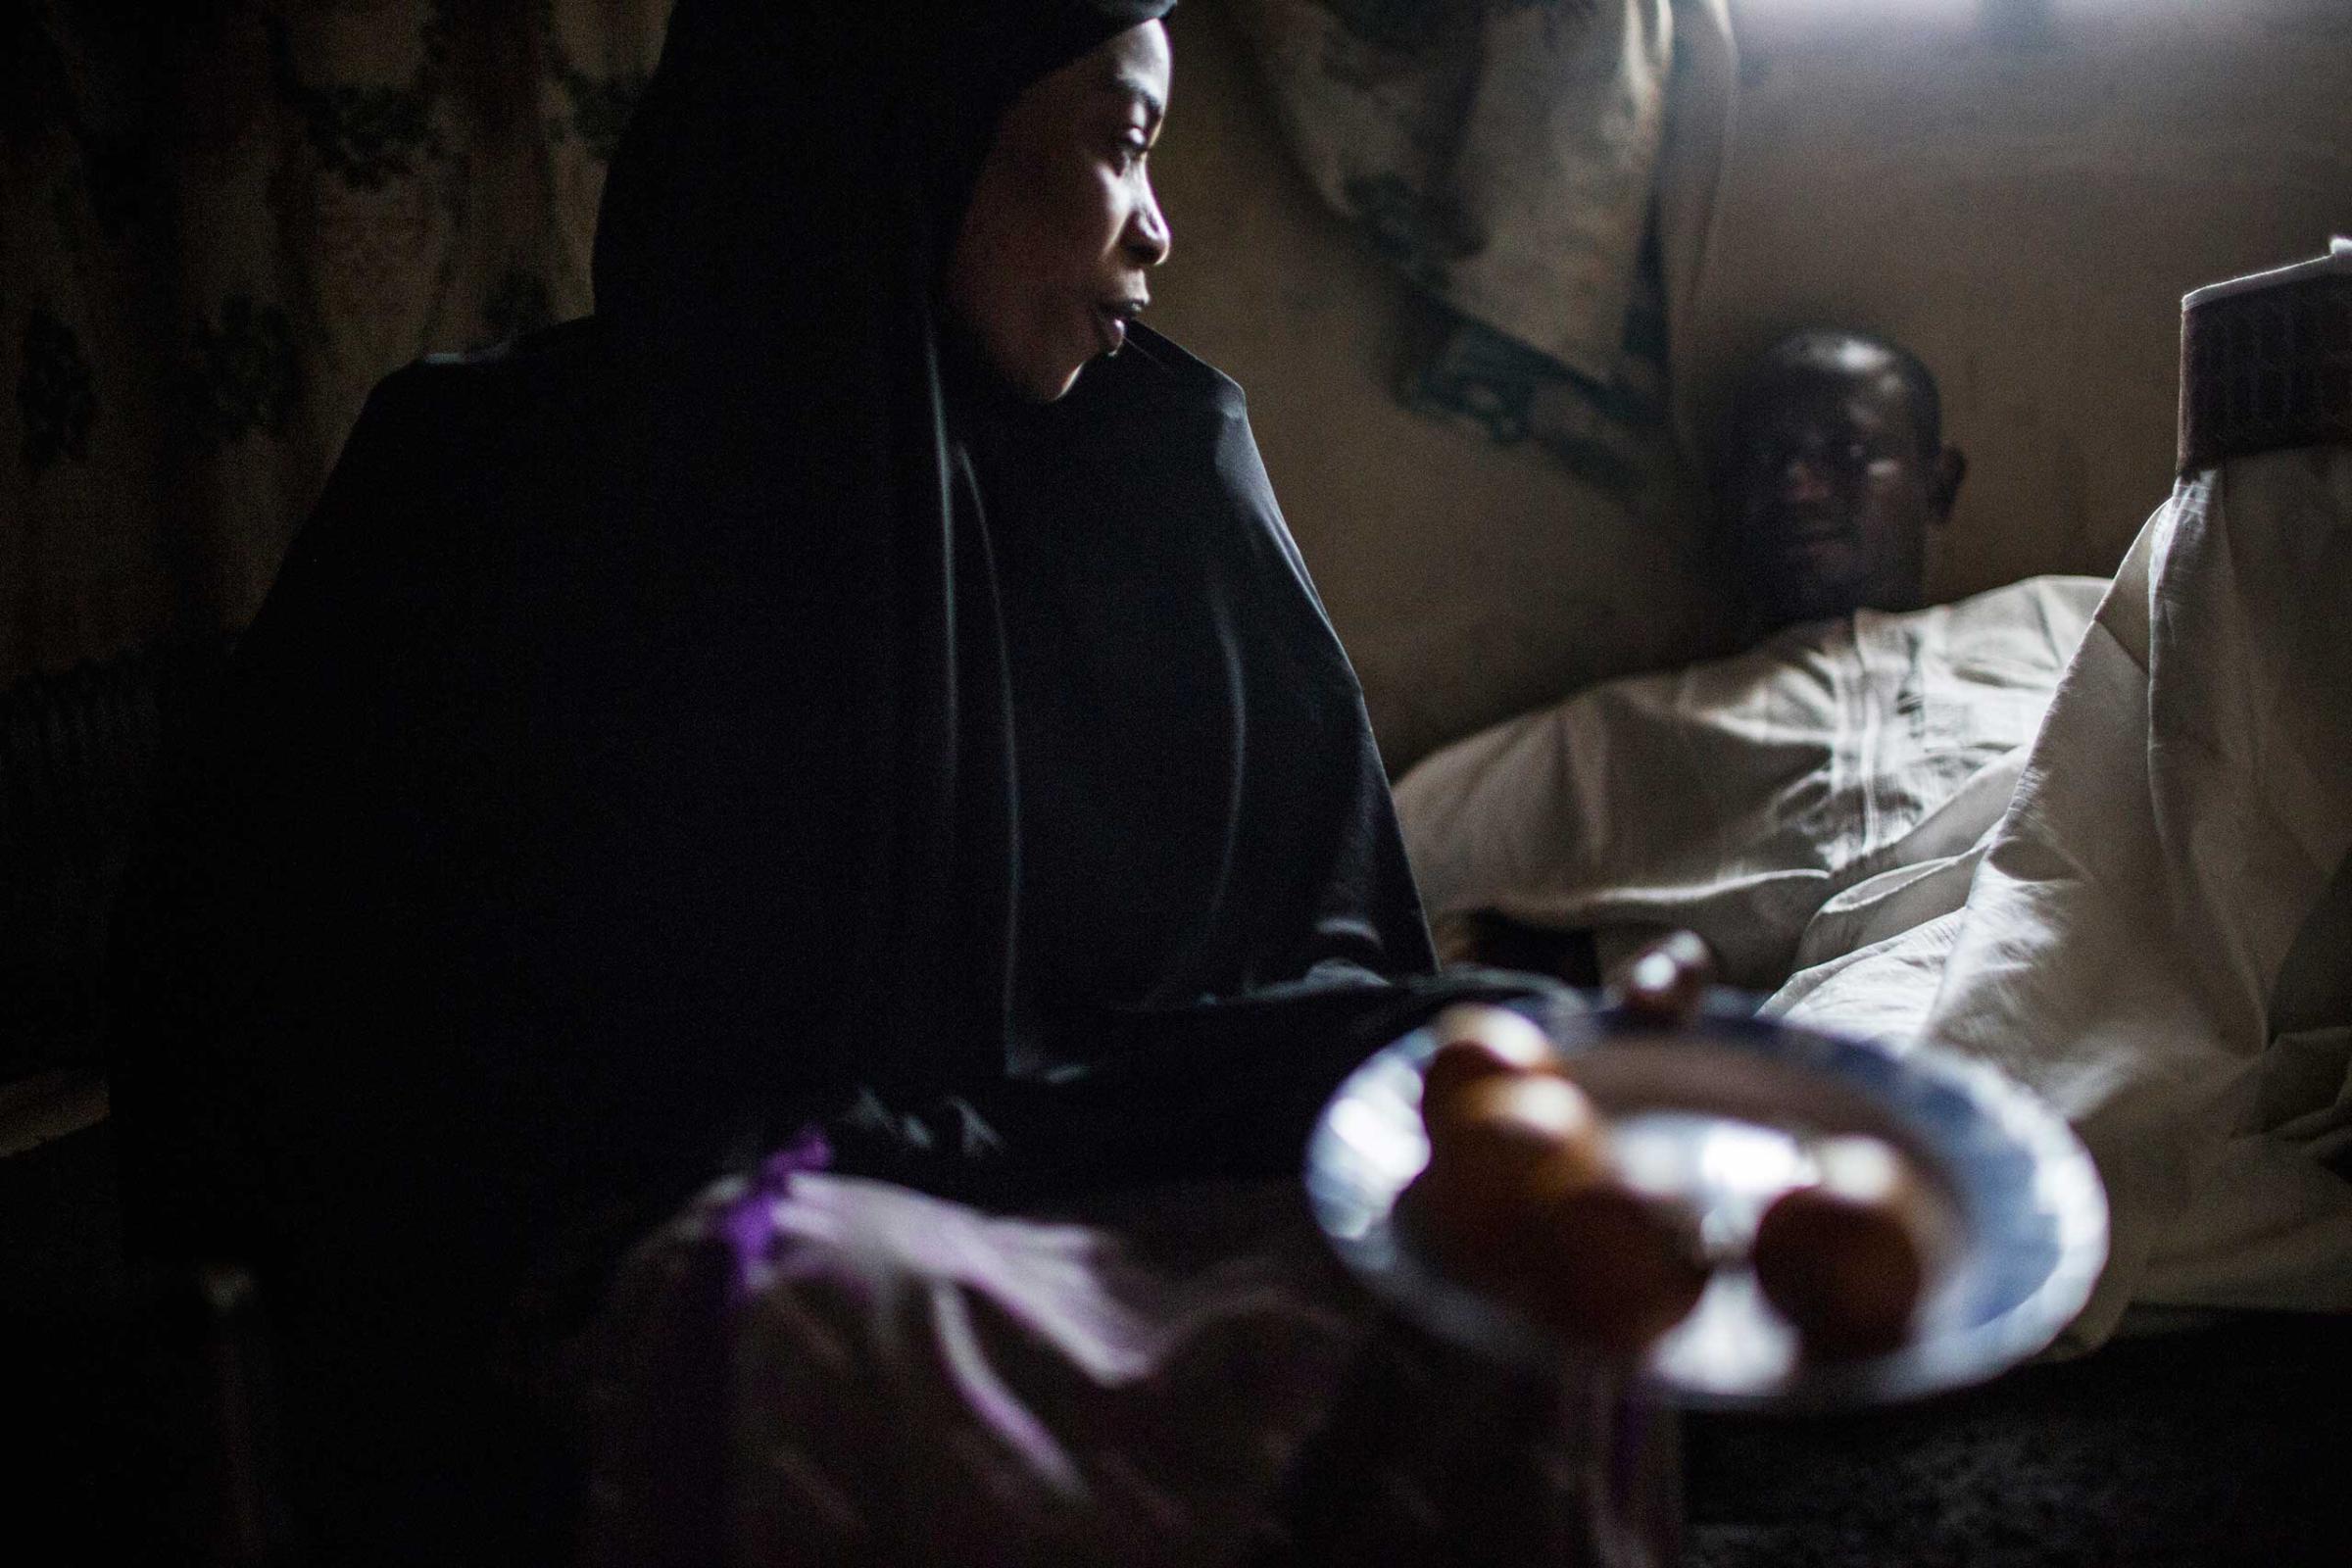 Rabi Tale, a romance novelist, sits at home with one of her suitors, Kano, Northern Nigeria, Feb. 23, 2014.